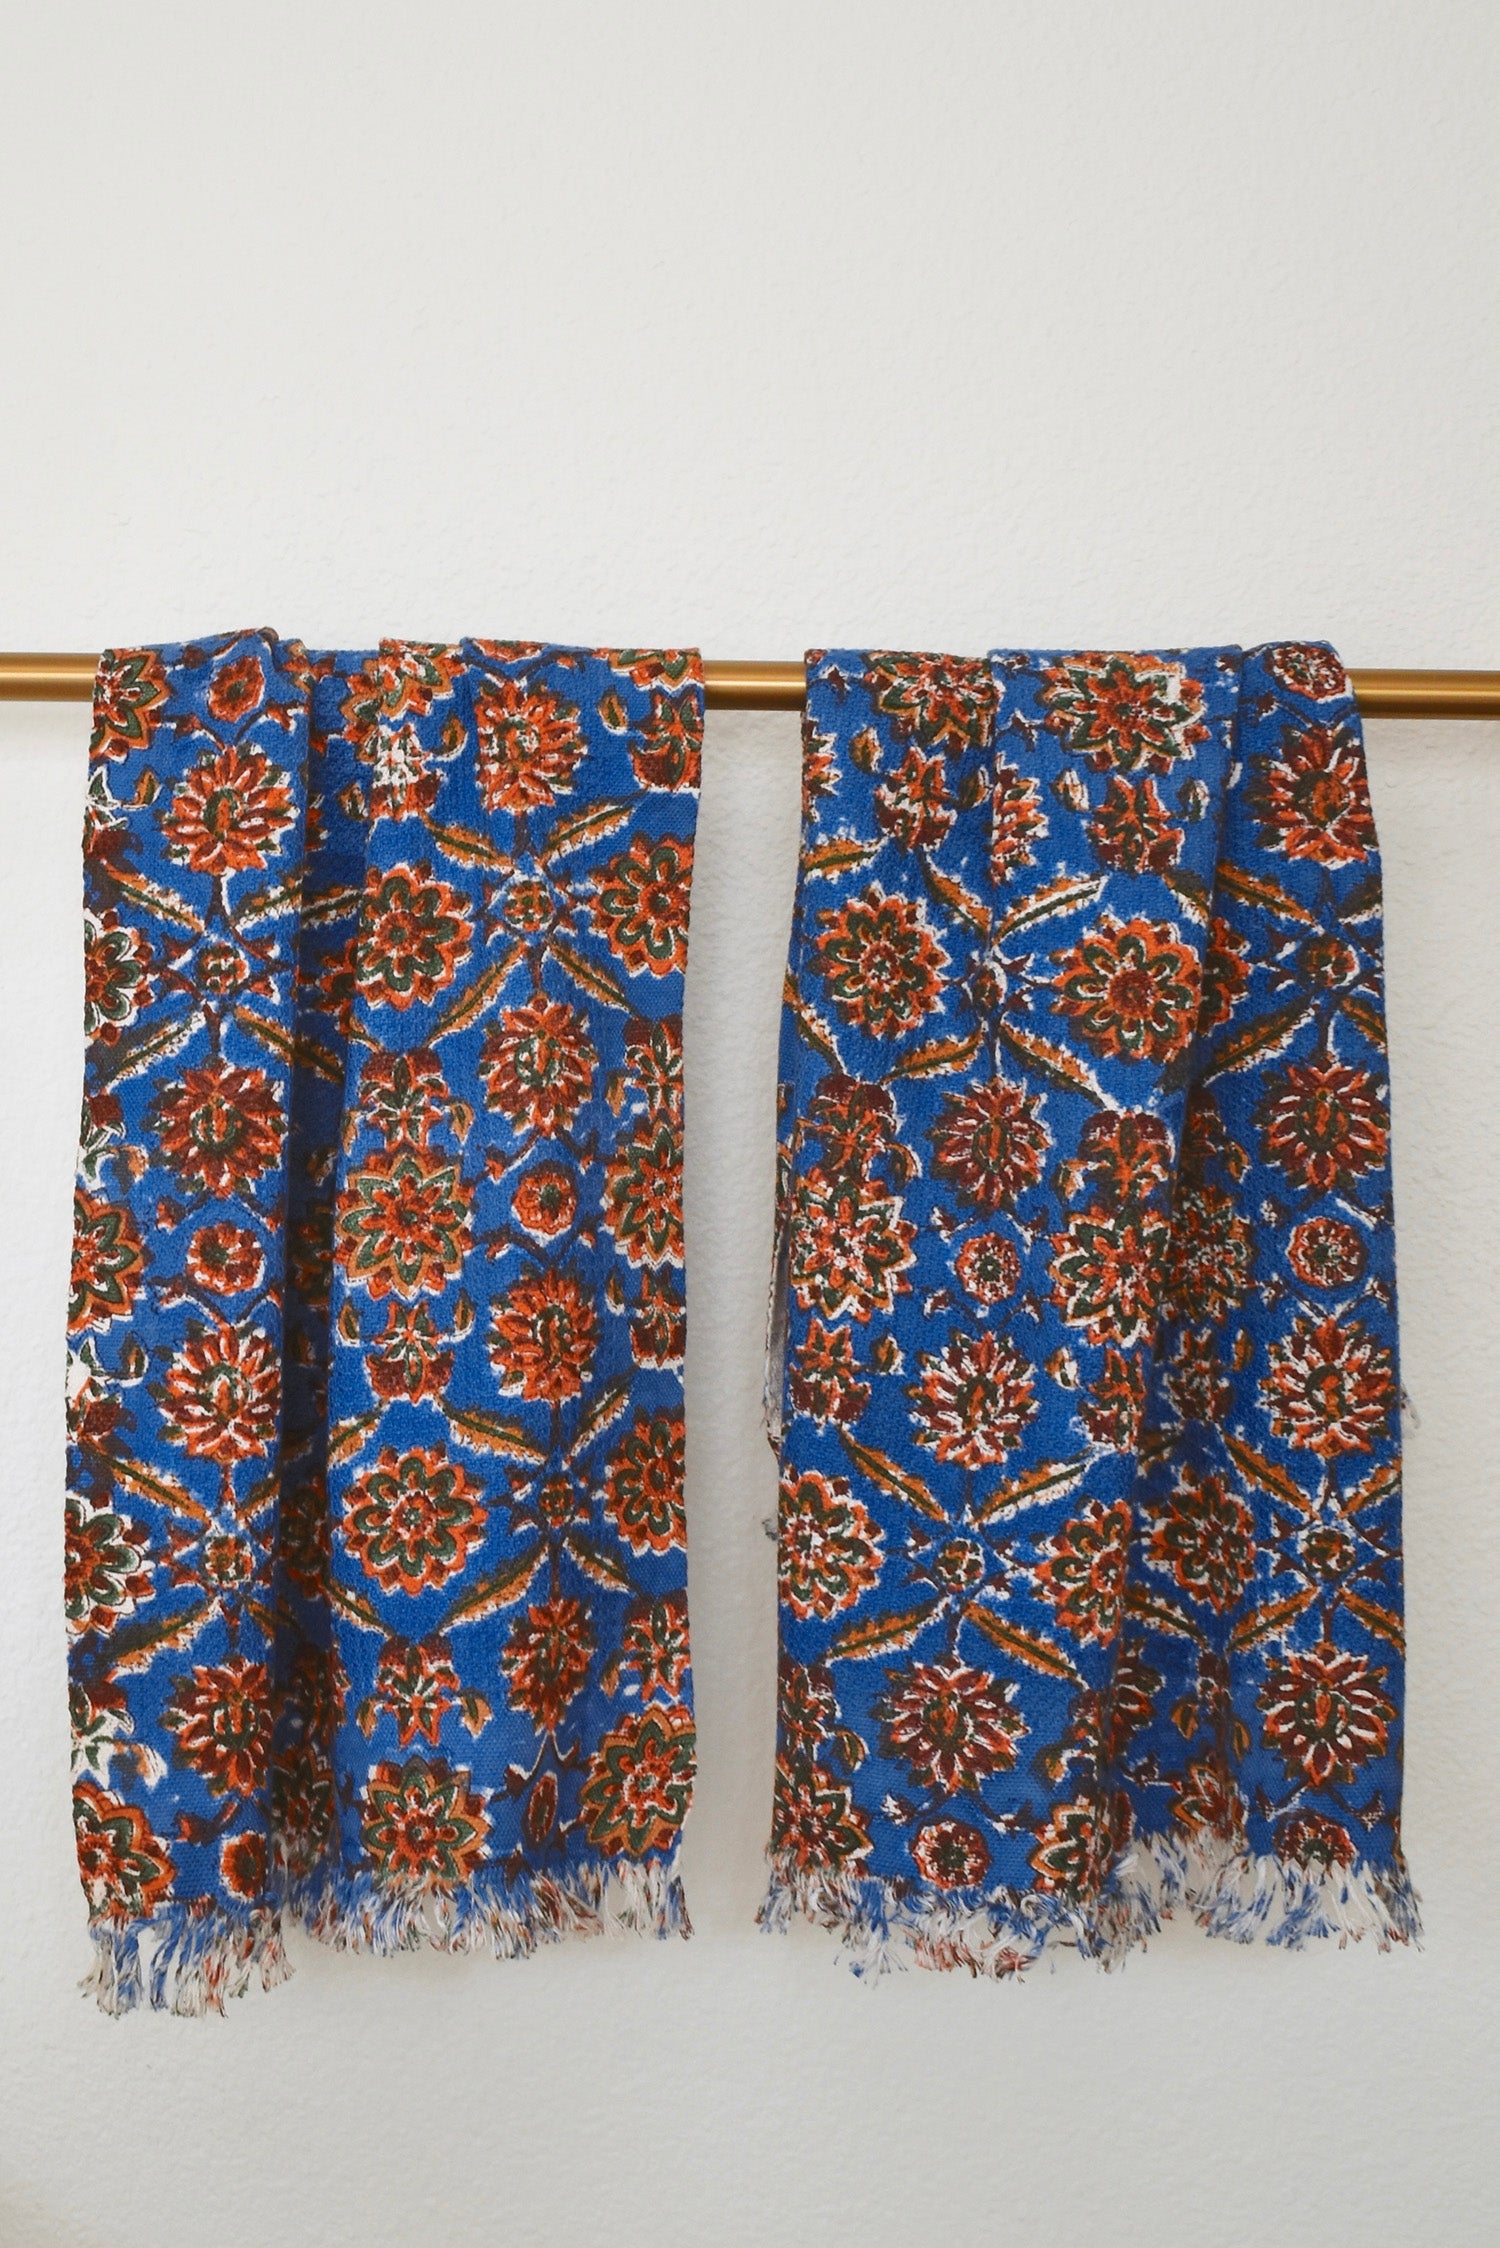 Two Adria block printed khadi cotton hand towels hanging on a gold bathroom rod